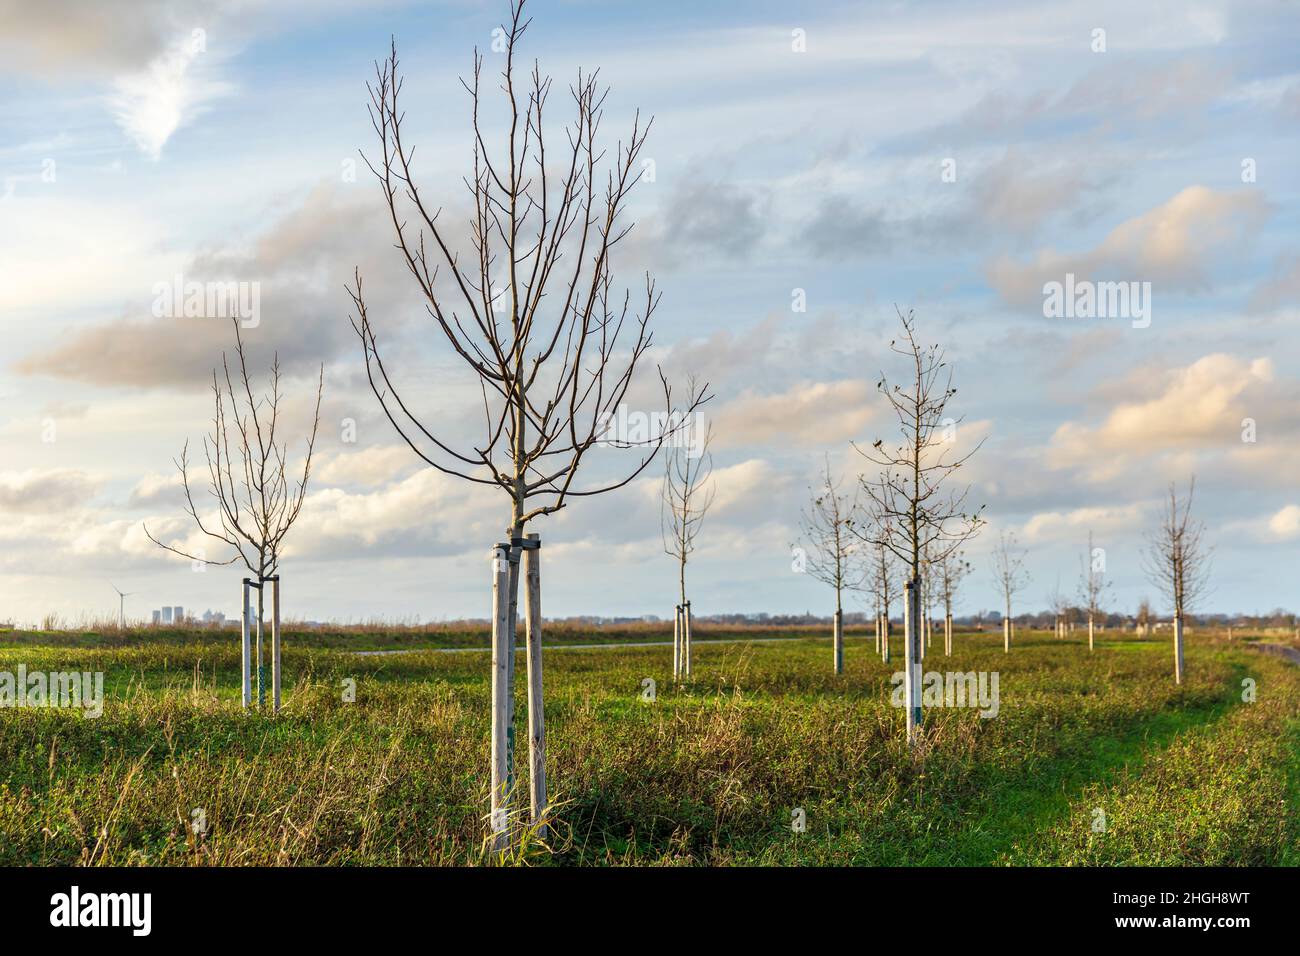 Planting young trees to grow a new forest in a new nature landscape called de Nieuwe Driemanspolder, the Netherlands Stock Photo